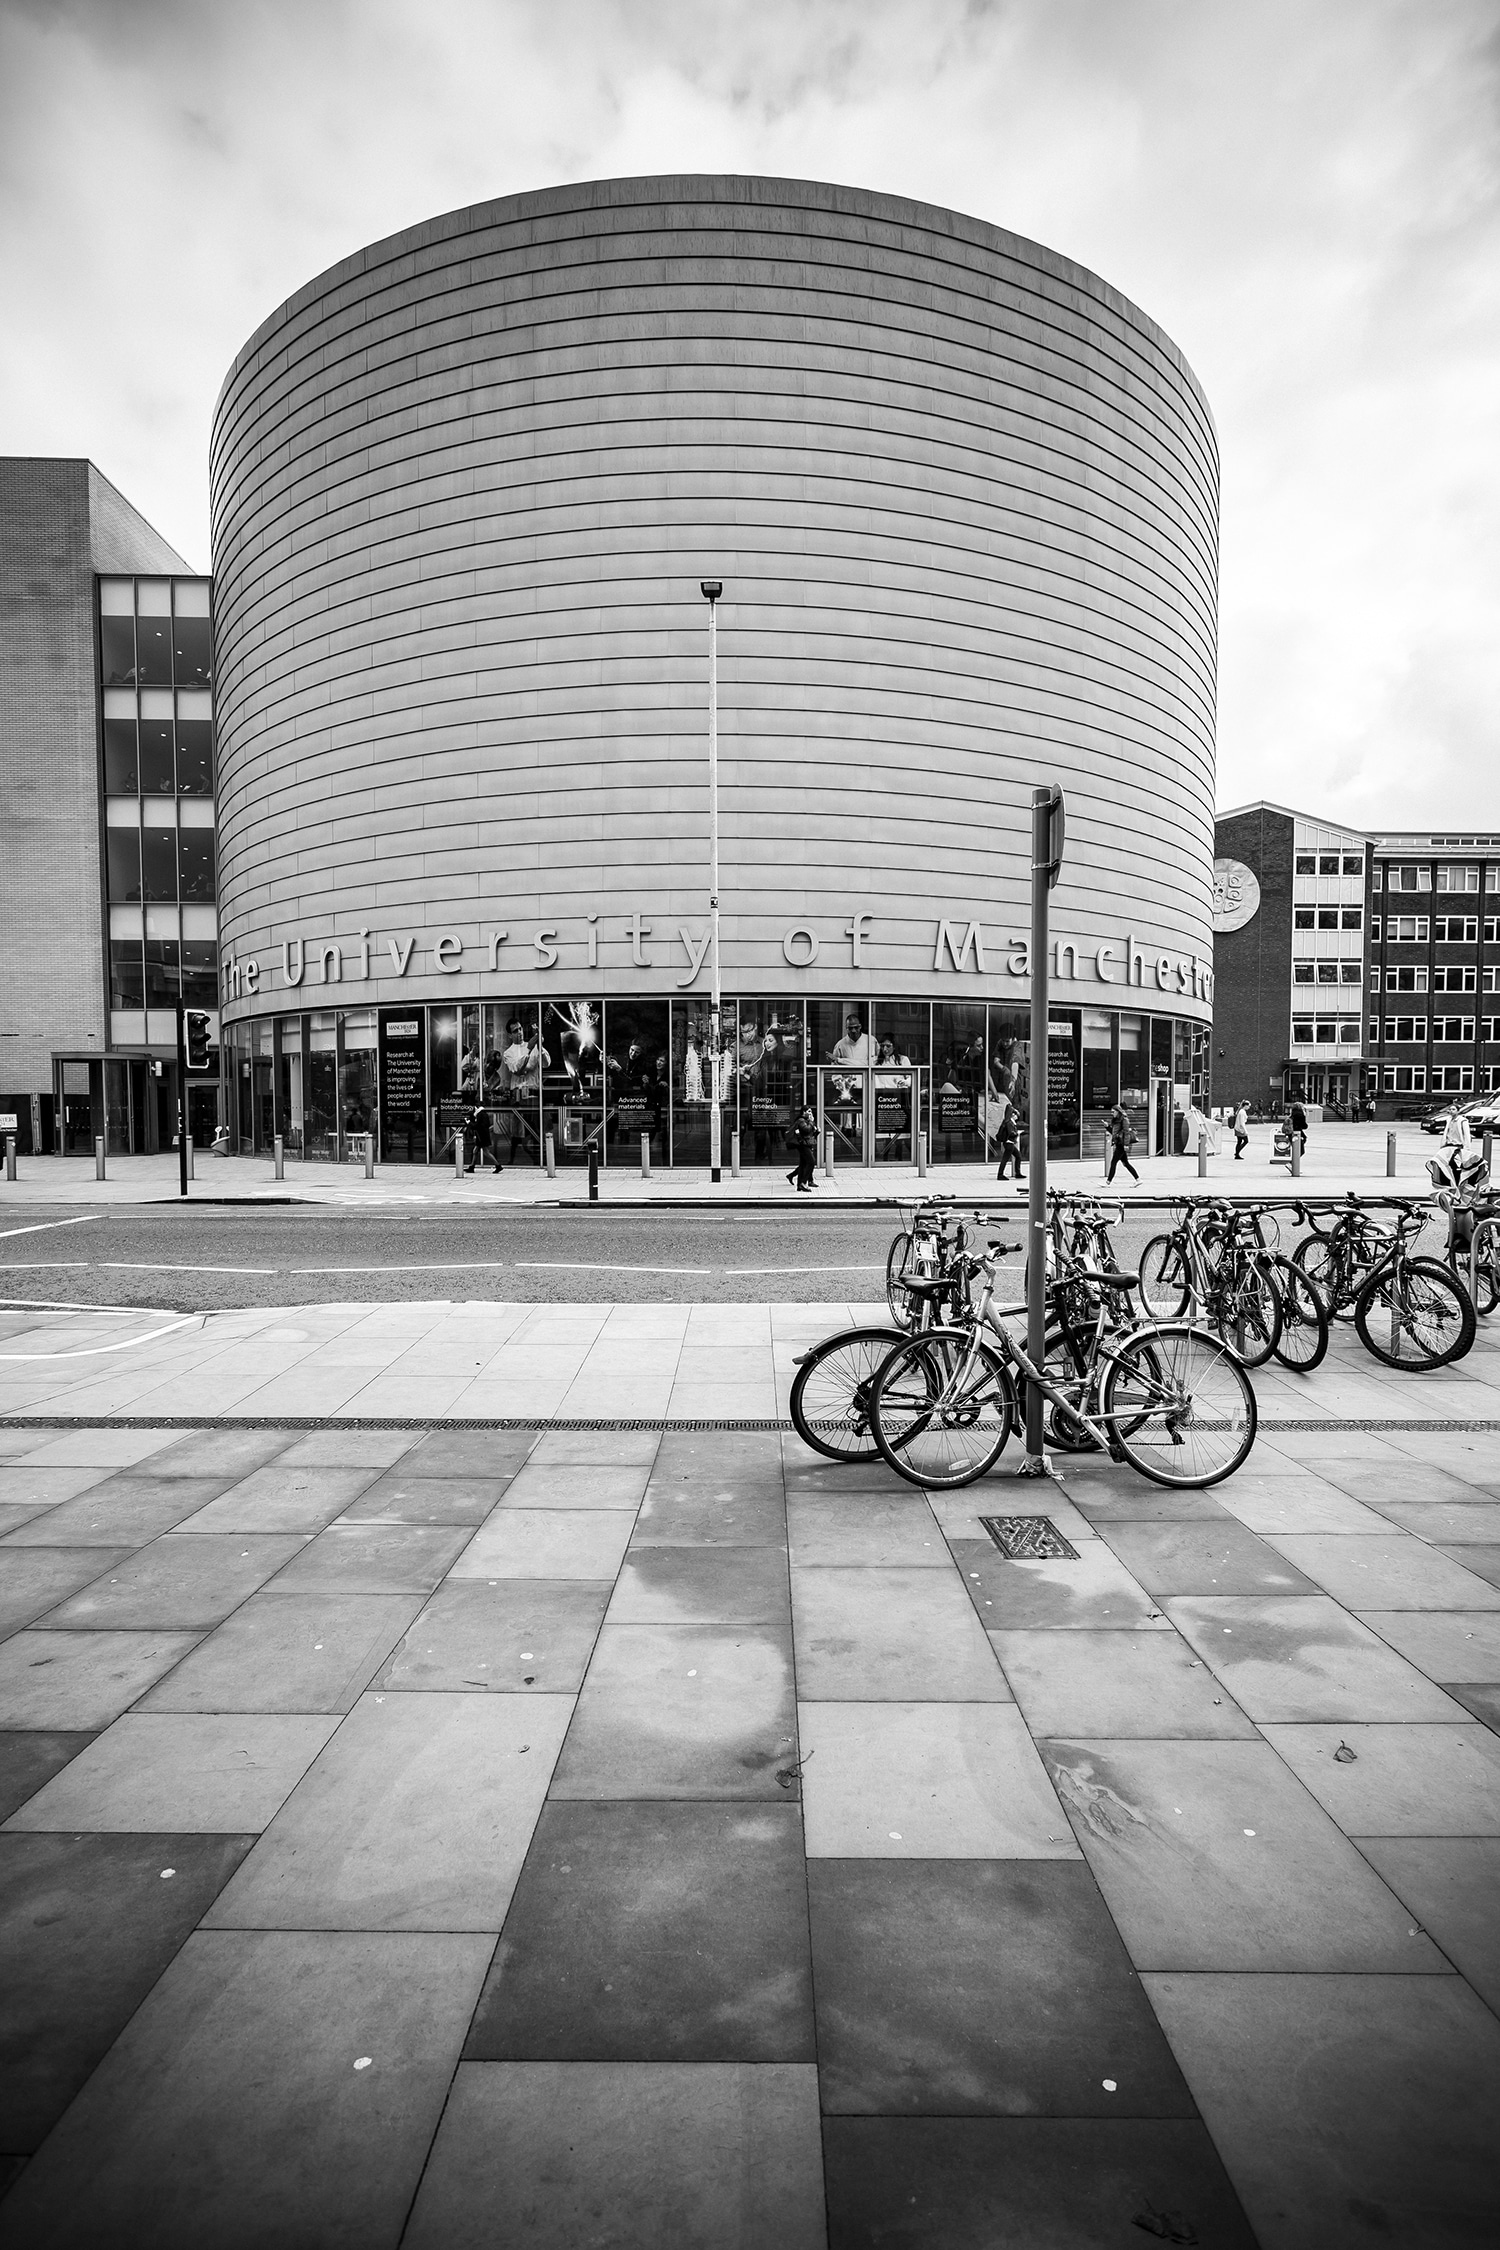 The University of Manchester Manchester Landscapes Architecture